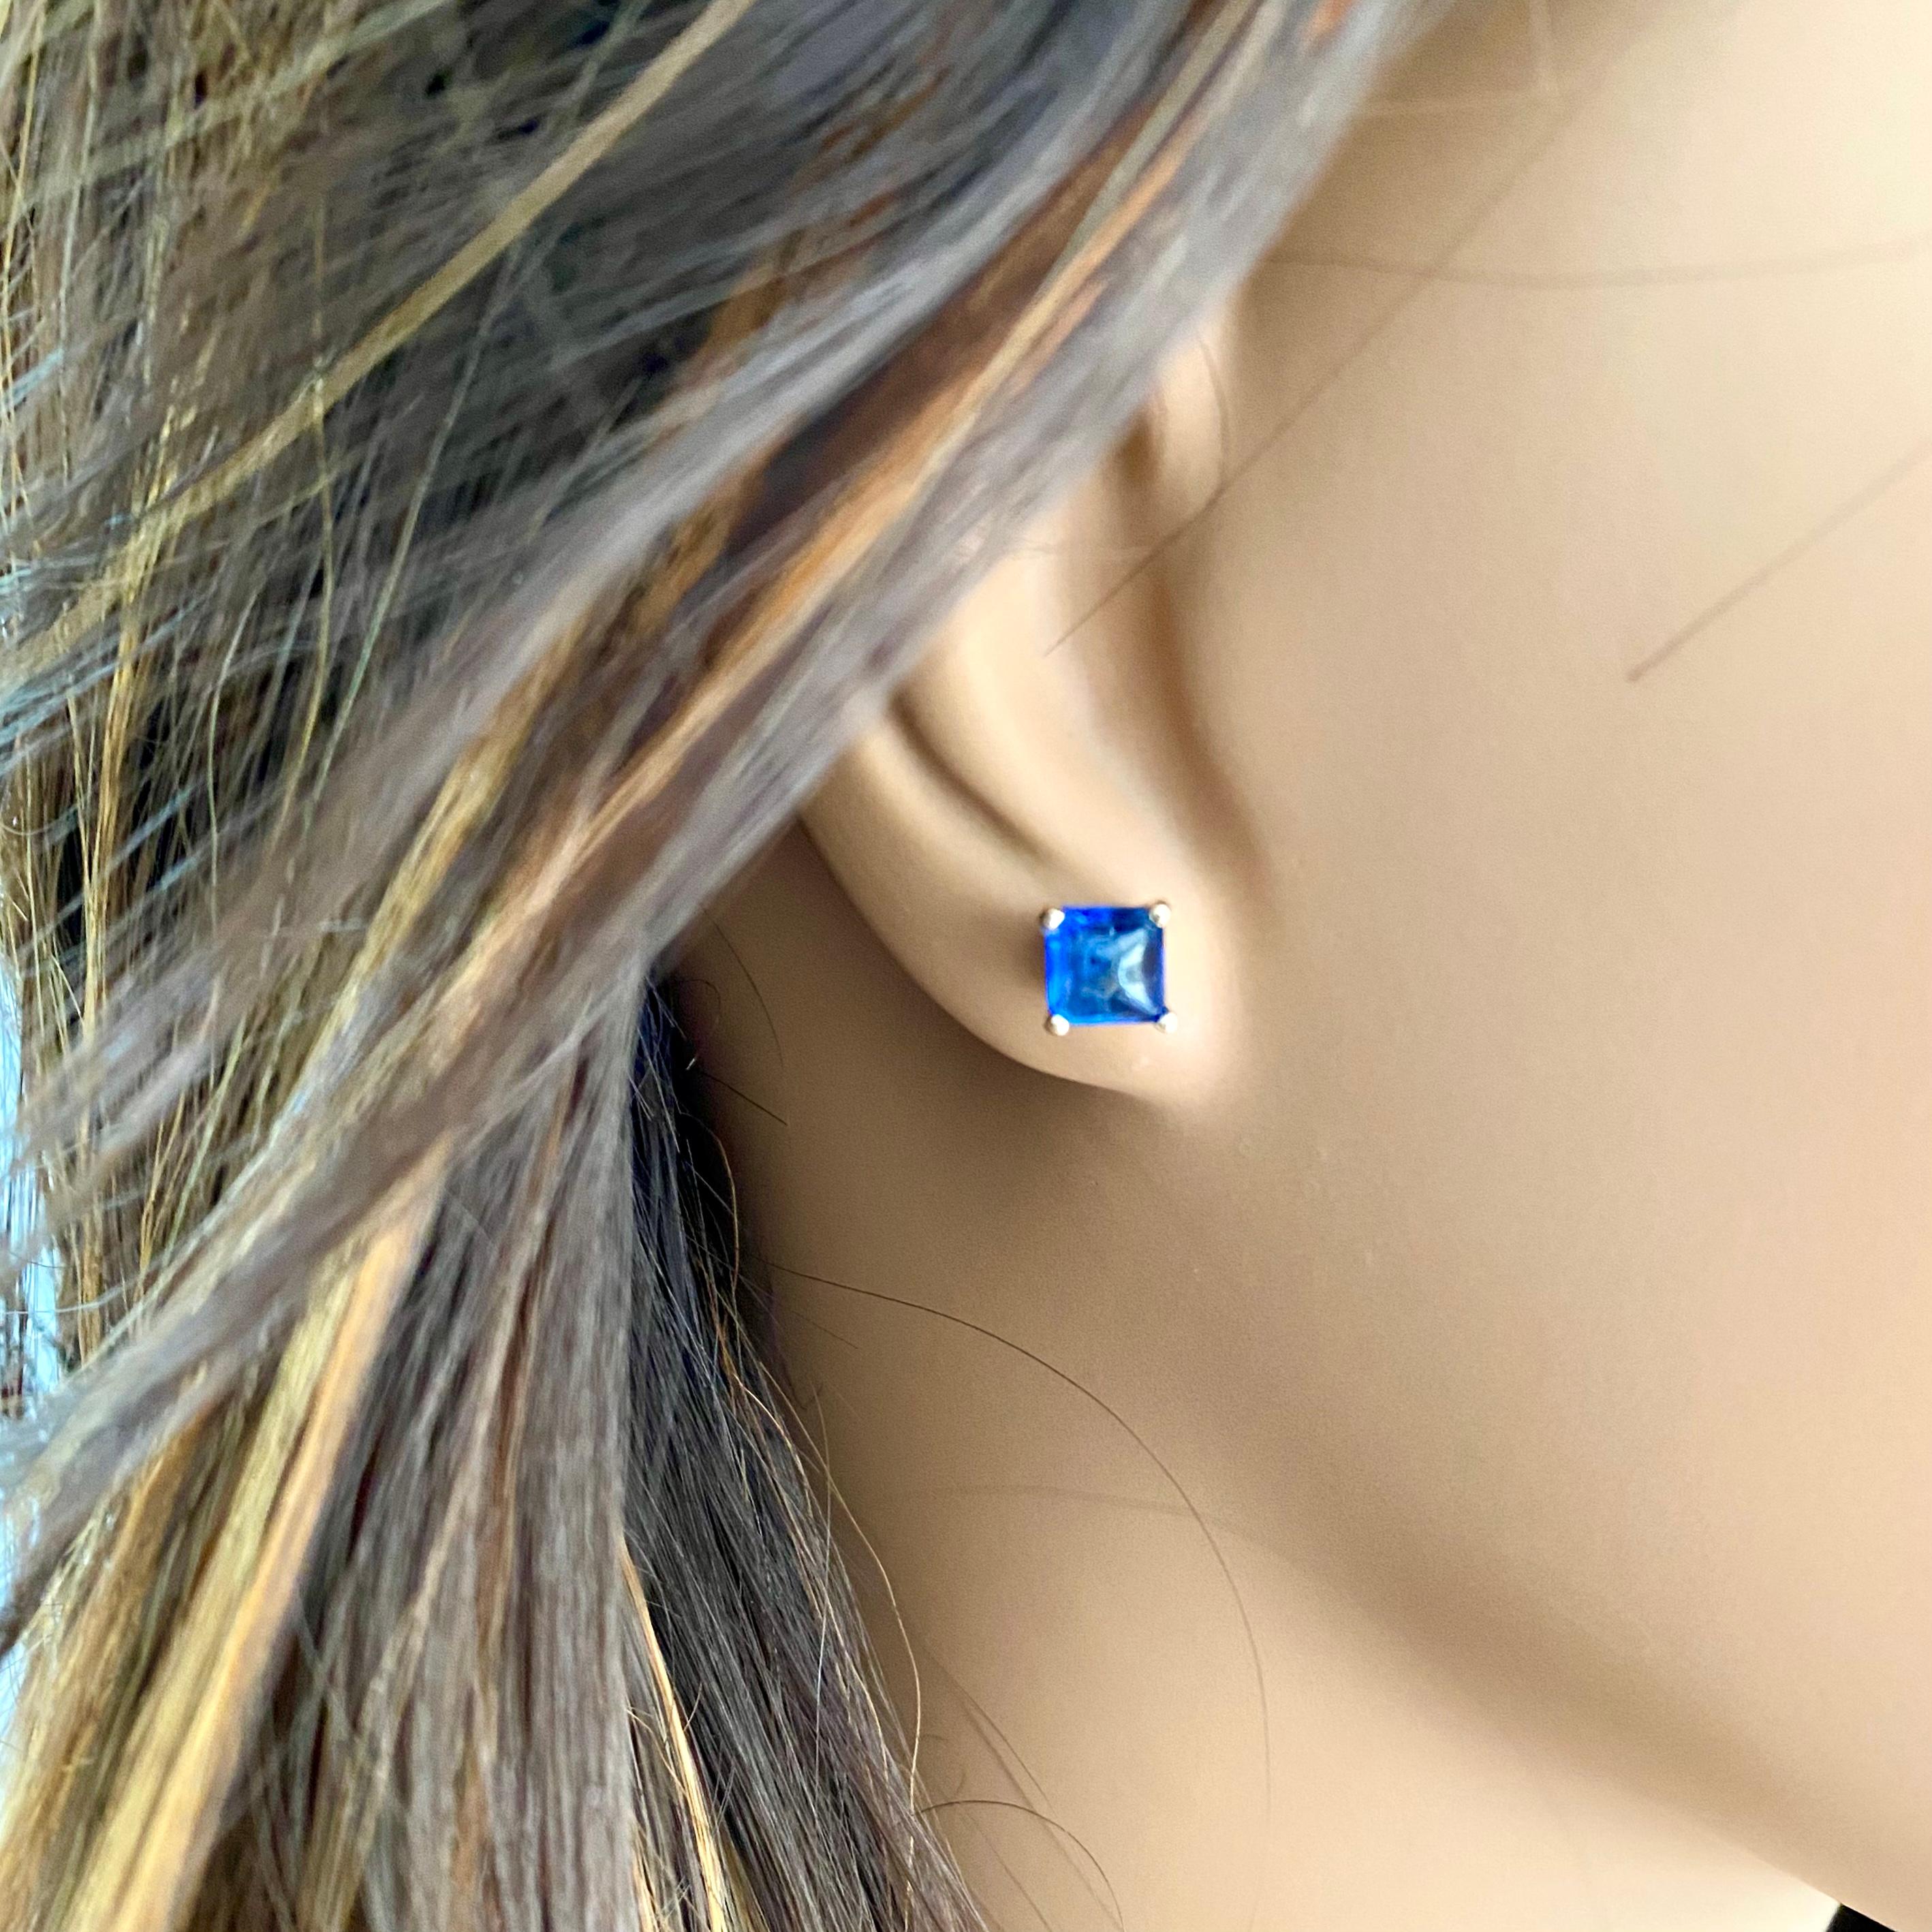 14K Yellow Gold Sugarloaf Ceylon Sapphire Stud Earrings
Elevate your style with these exquisite 14 karat yellow gold stud earrings, adorned with mesmerizing Ceylon sapphires. Crafted with meticulous attention to detail, each earring features a